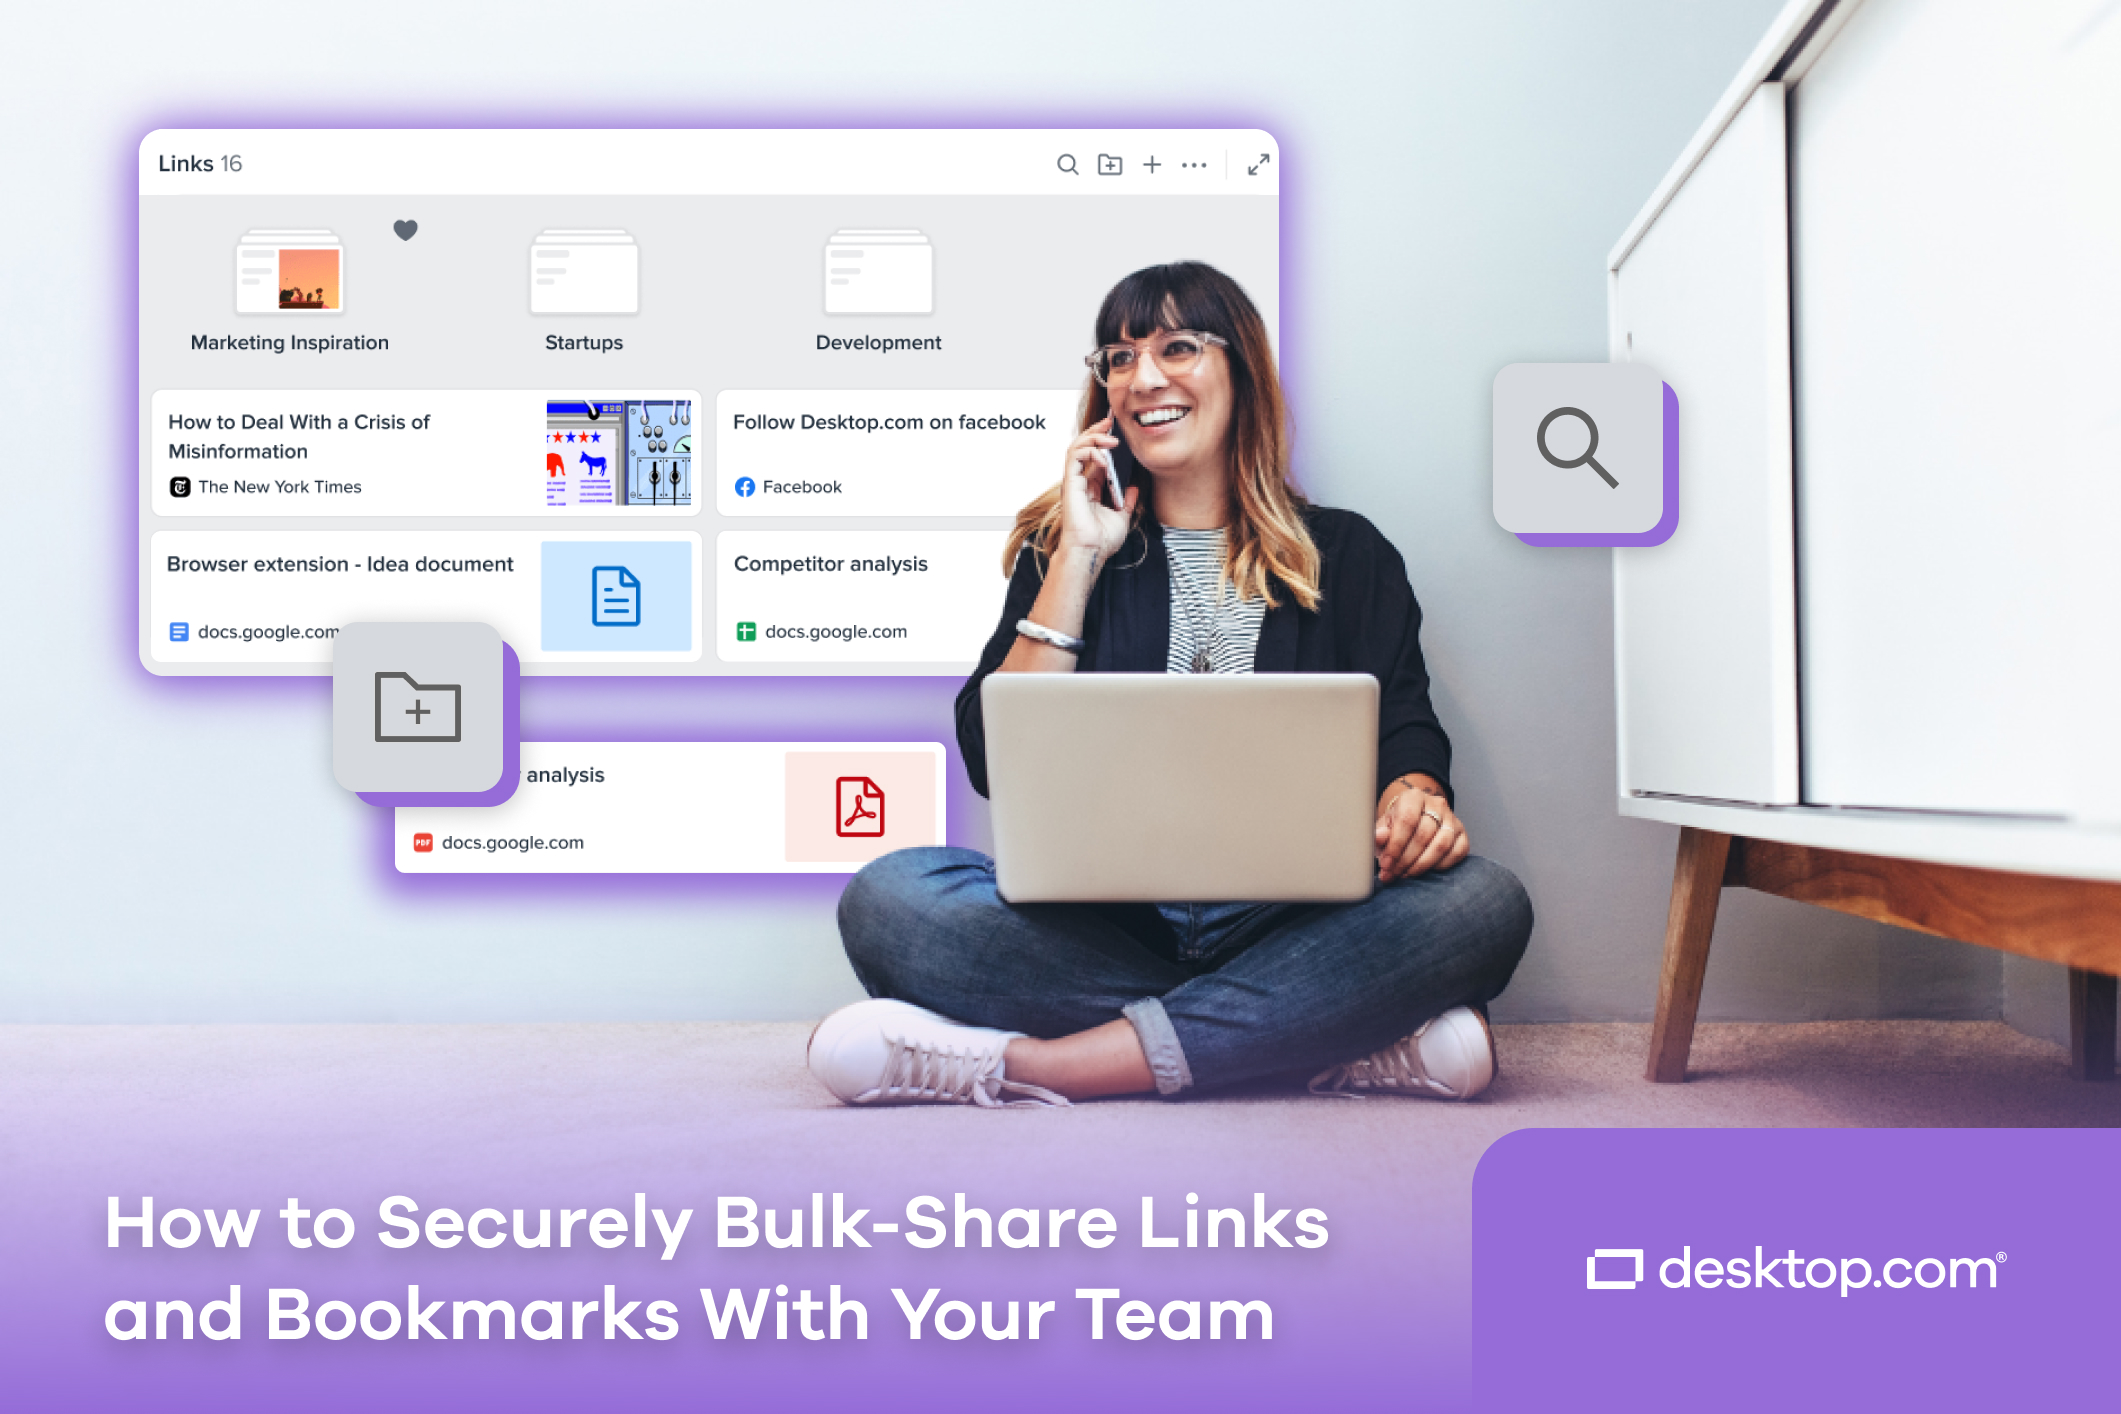 How to Securely Bulk-share Links and Bookmarks with Your Team